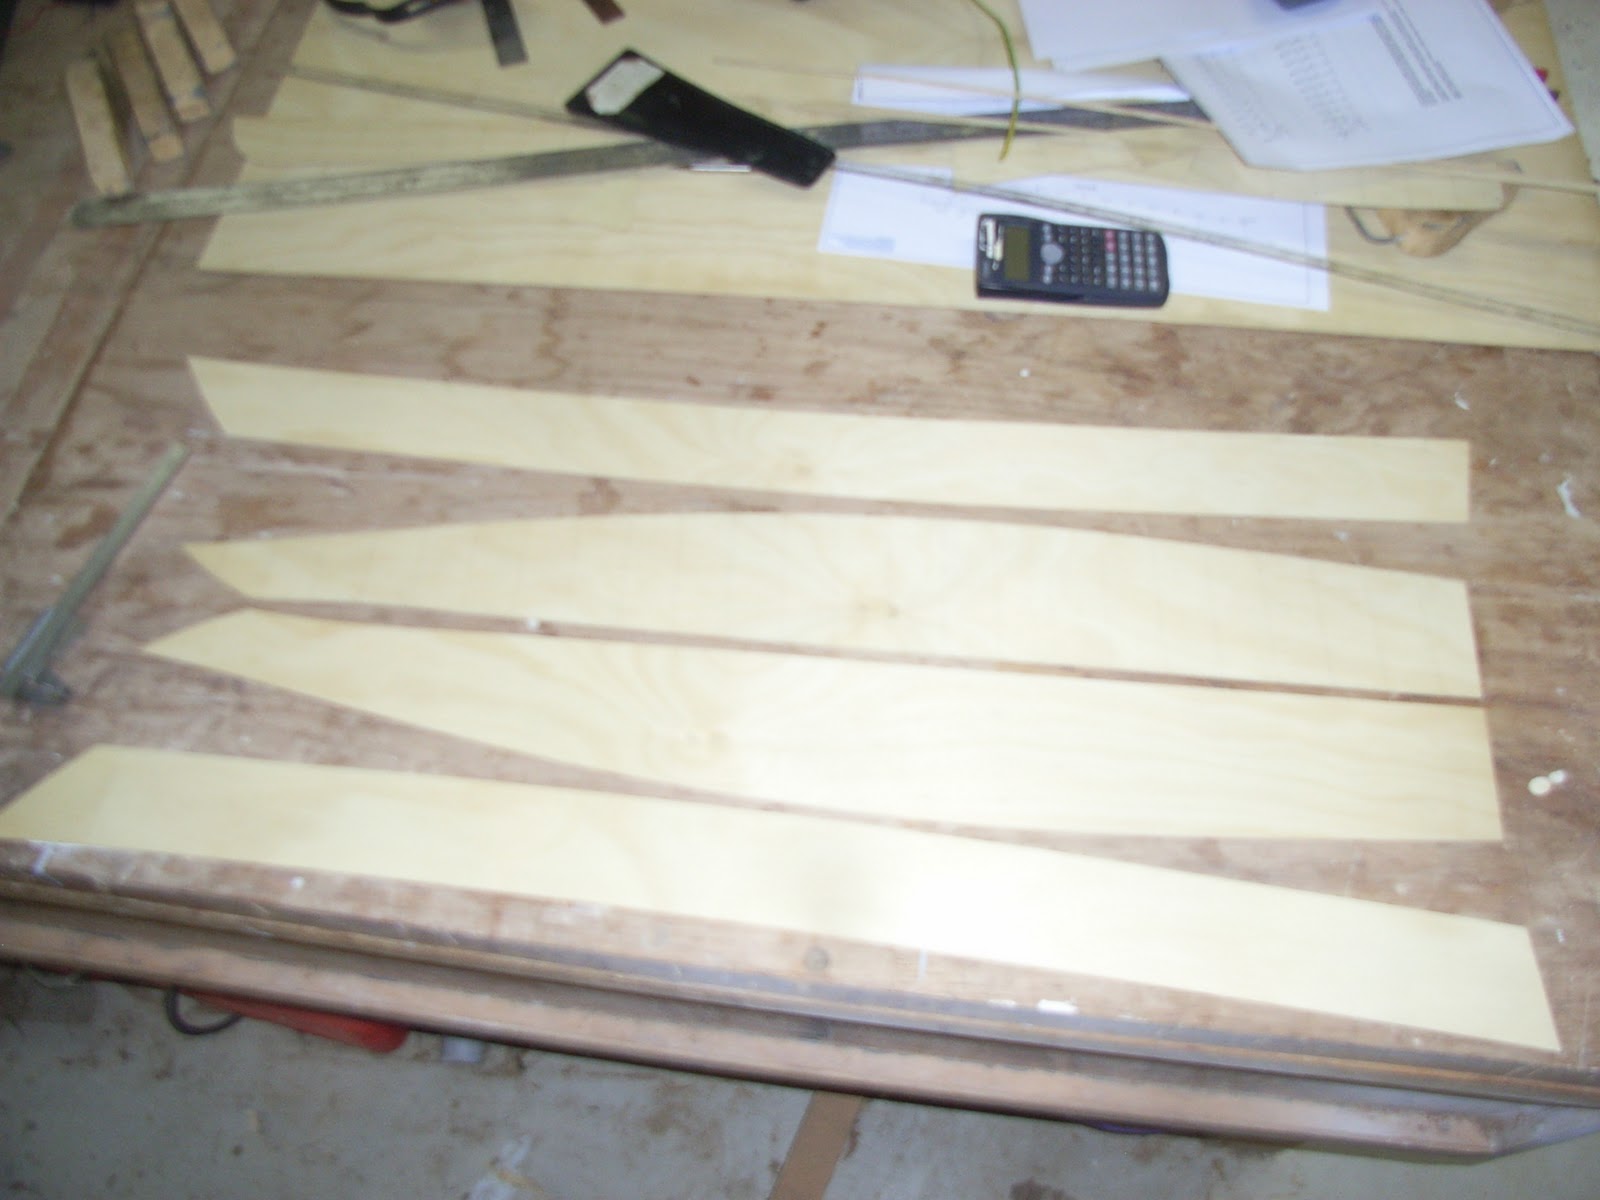 Hull panels for my Three Brothers design cut from 1.5mm Hoop Pine 